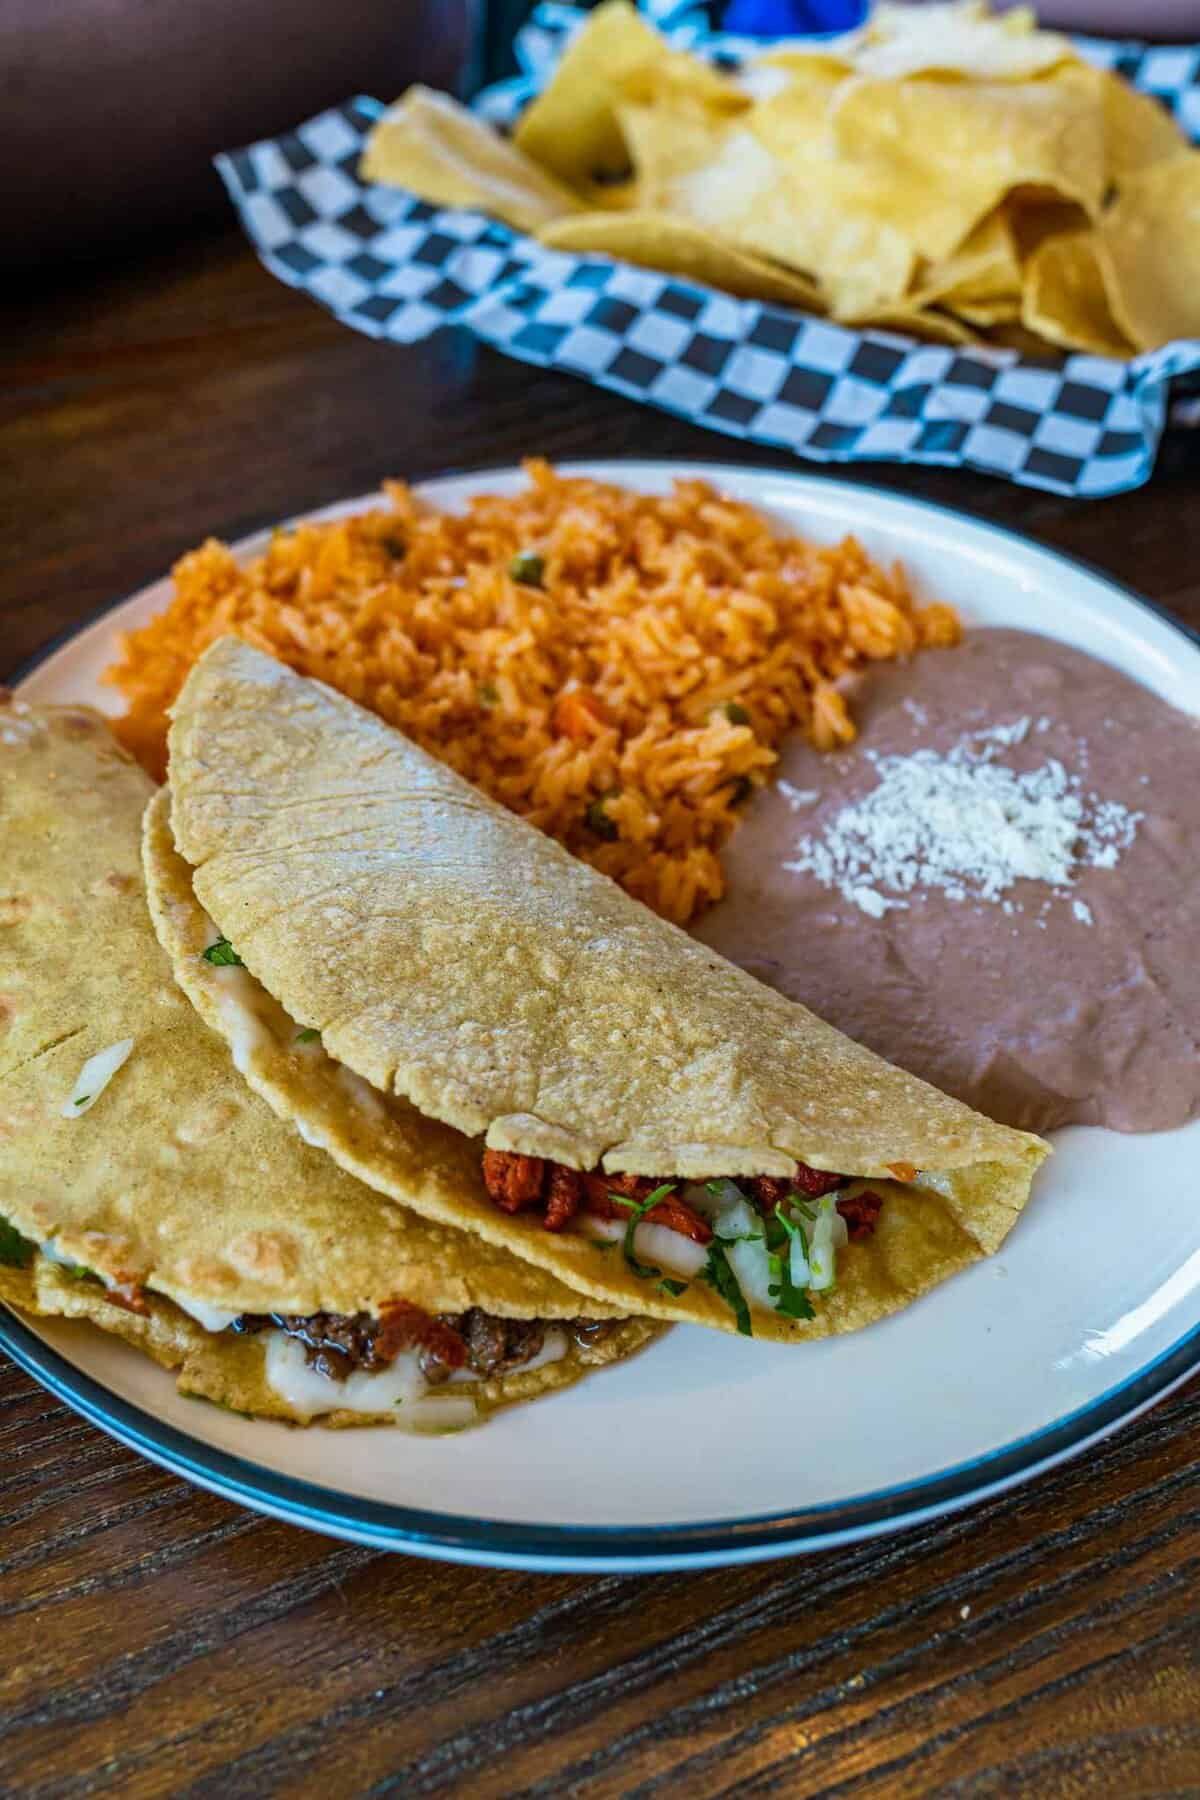 2 tacos with choice of meat (beef, chicken, or shrimp), with melted Oaxaca cheese. Served with rice and refried beans.